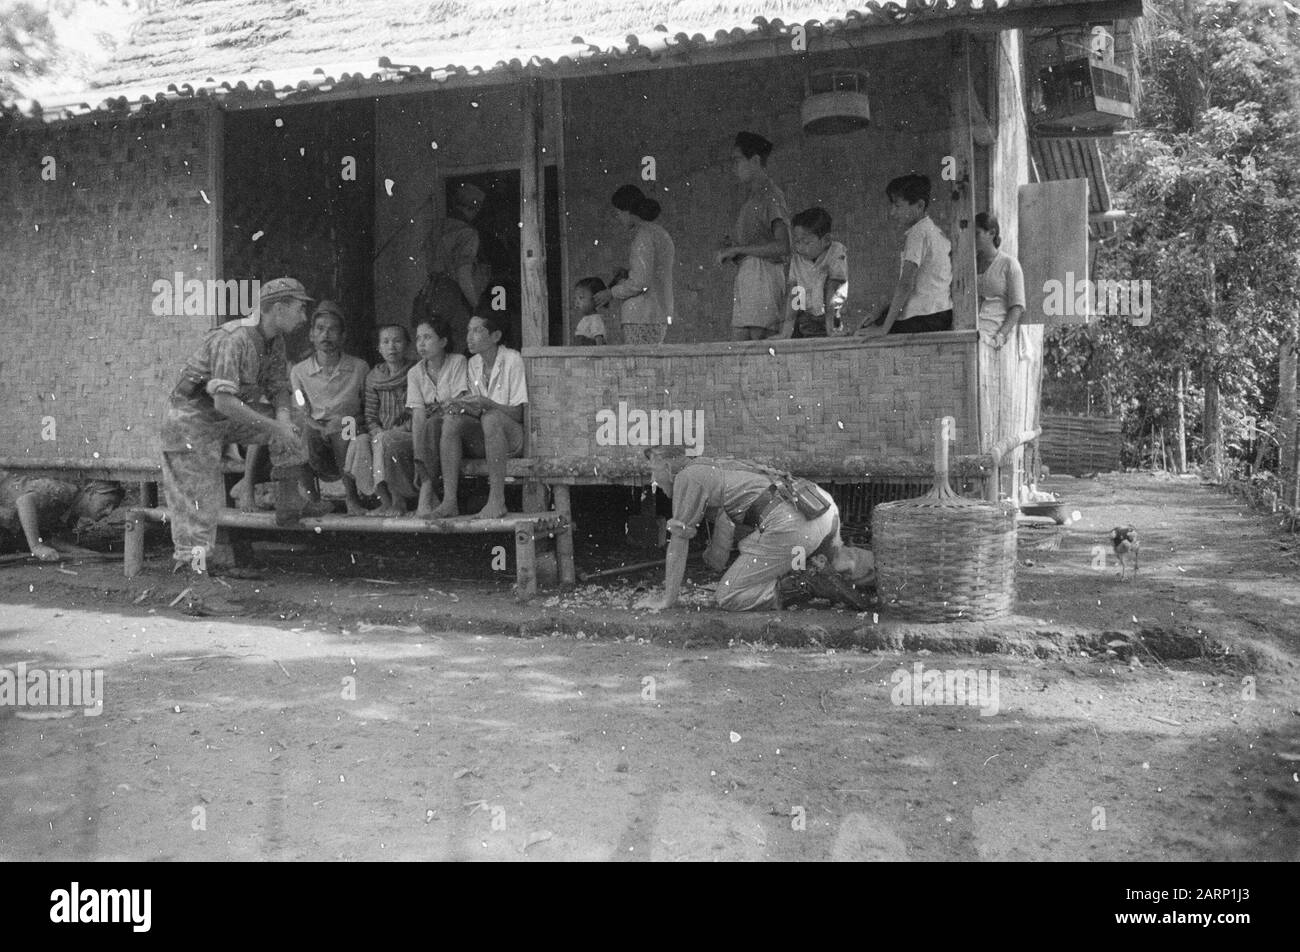 Action Regiment 3 Princess Irene Brigade  Sukb Sector: while the patrol scrupulously searches the houses, the chaplain makes a chat with the population. He is in conversation with a former student of the Bandoengse Technische Hogeschool, who is currently working as tani Date: 29 October 1947 Location: Indonesia, Java, Dutch East Indies Stock Photo